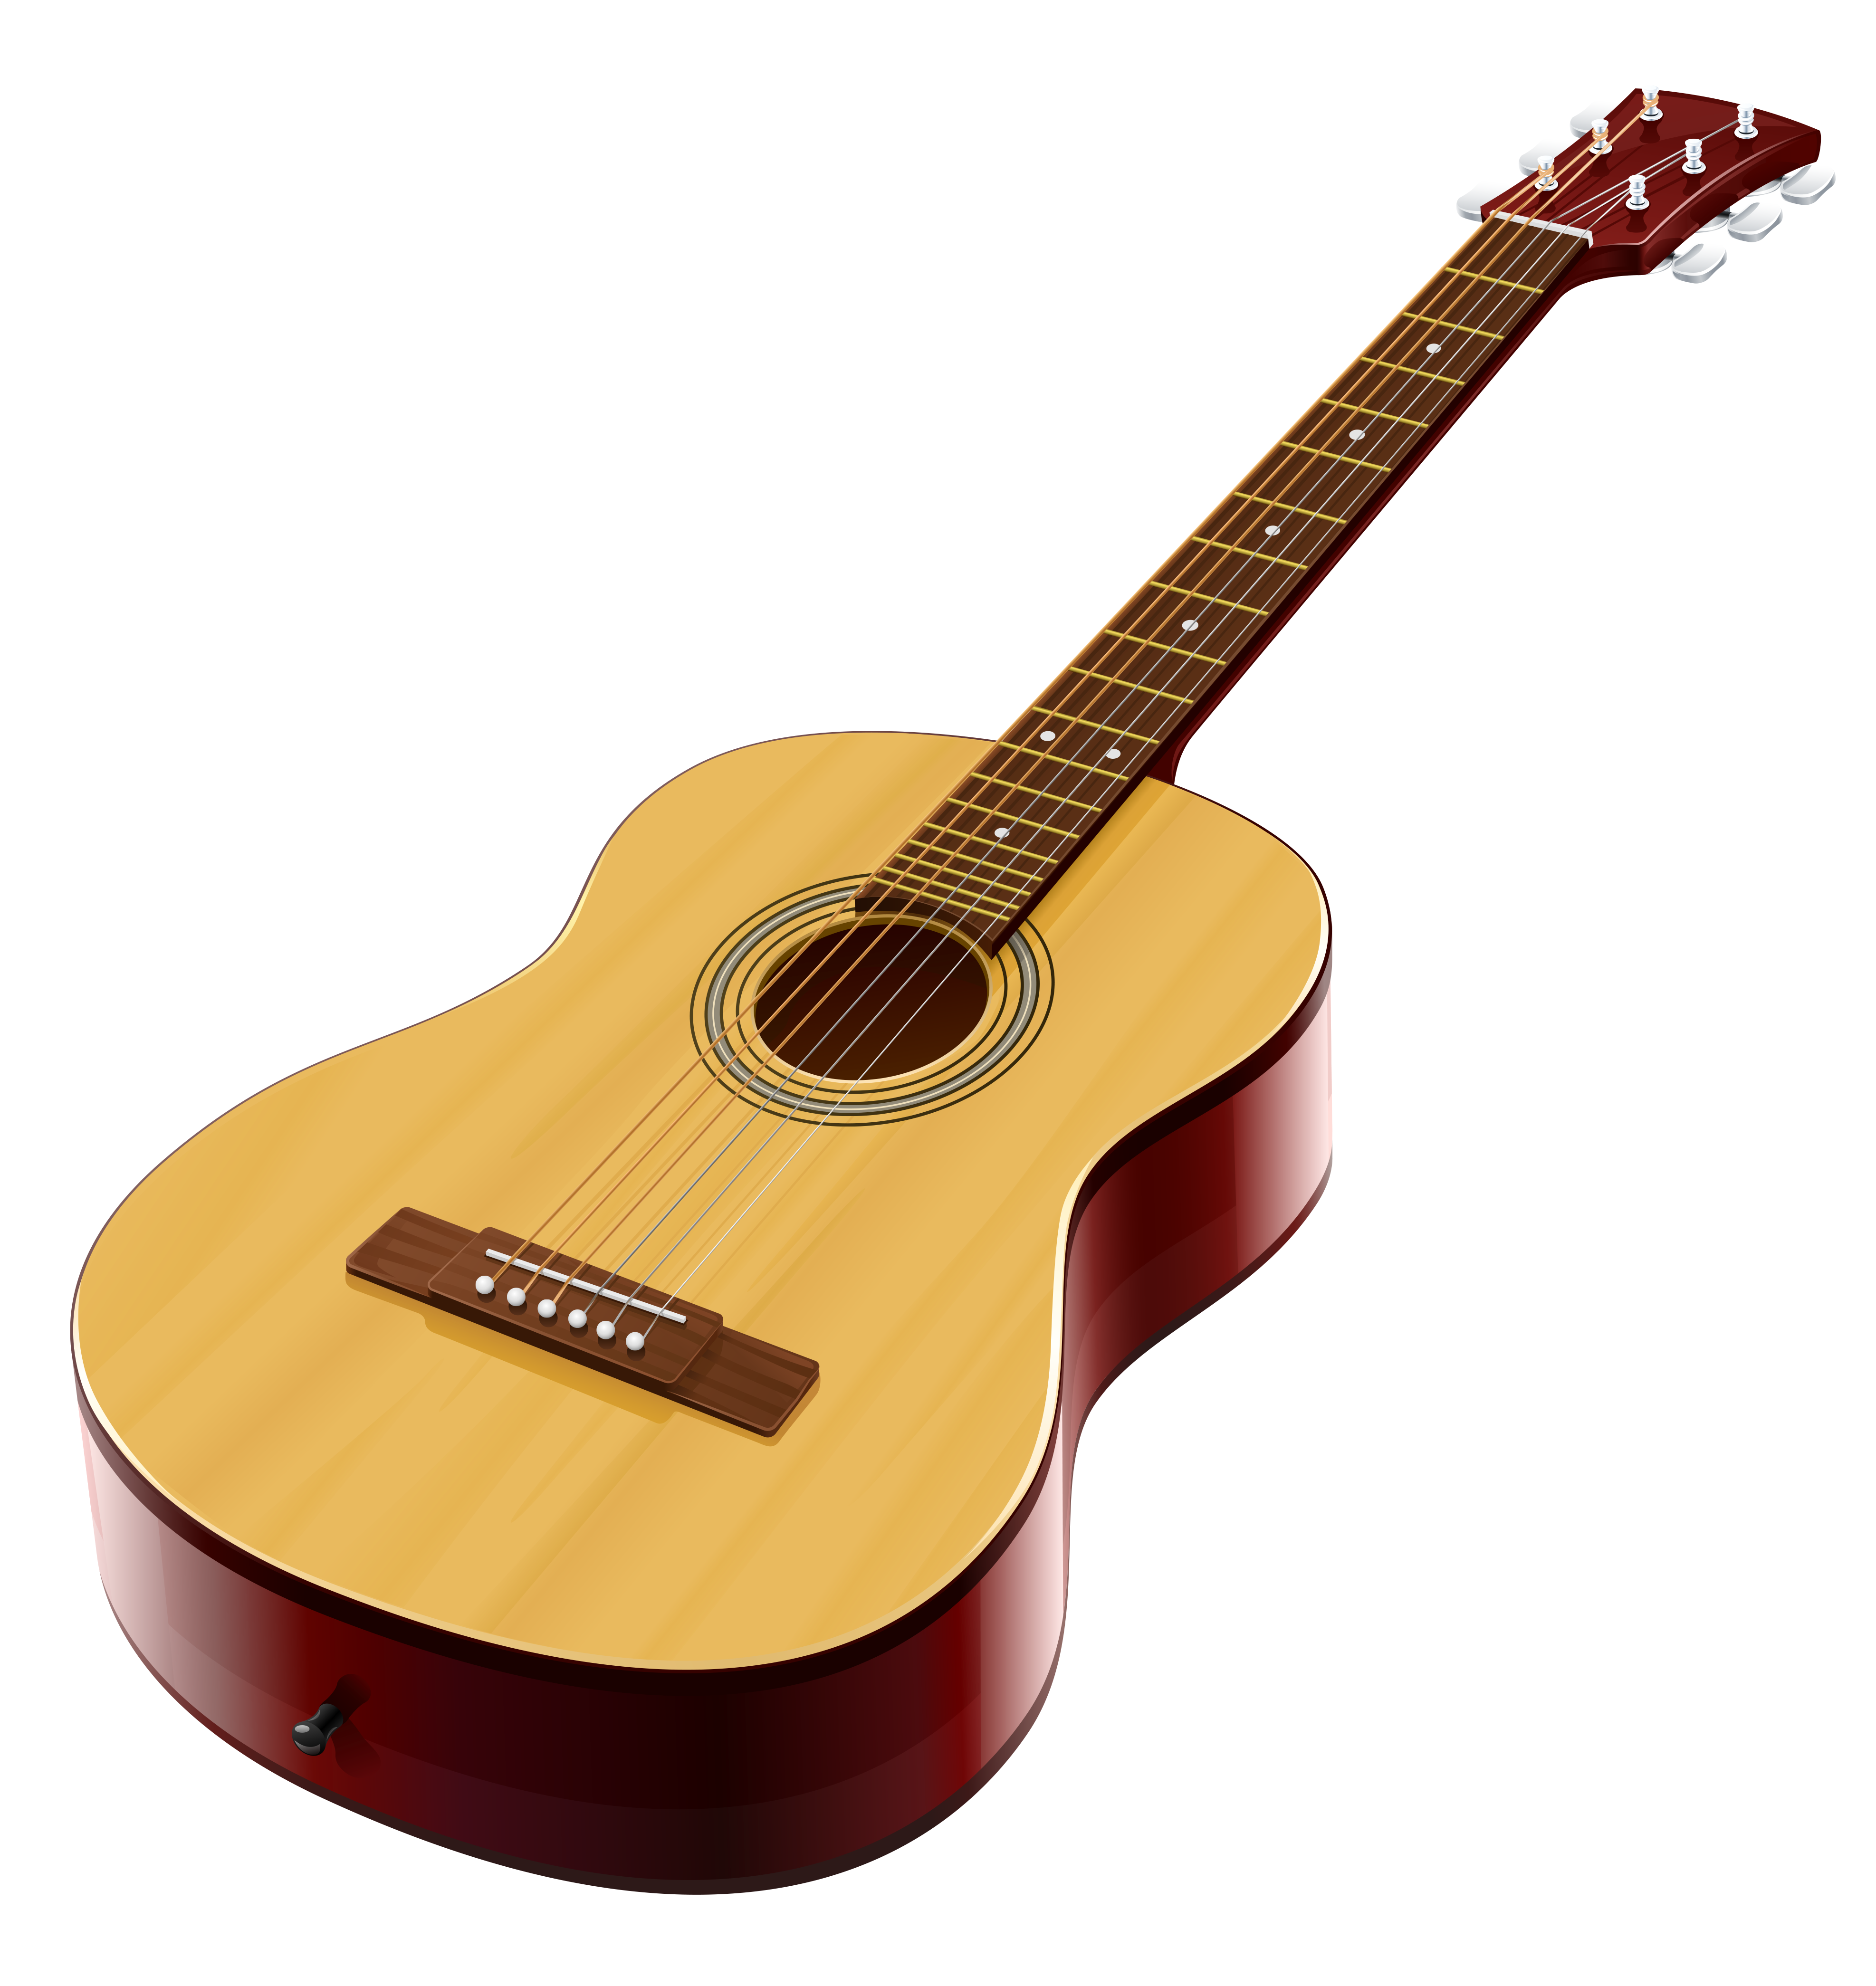 Guitar Instrument Musical Classic HQ Image Free PNG Clipart